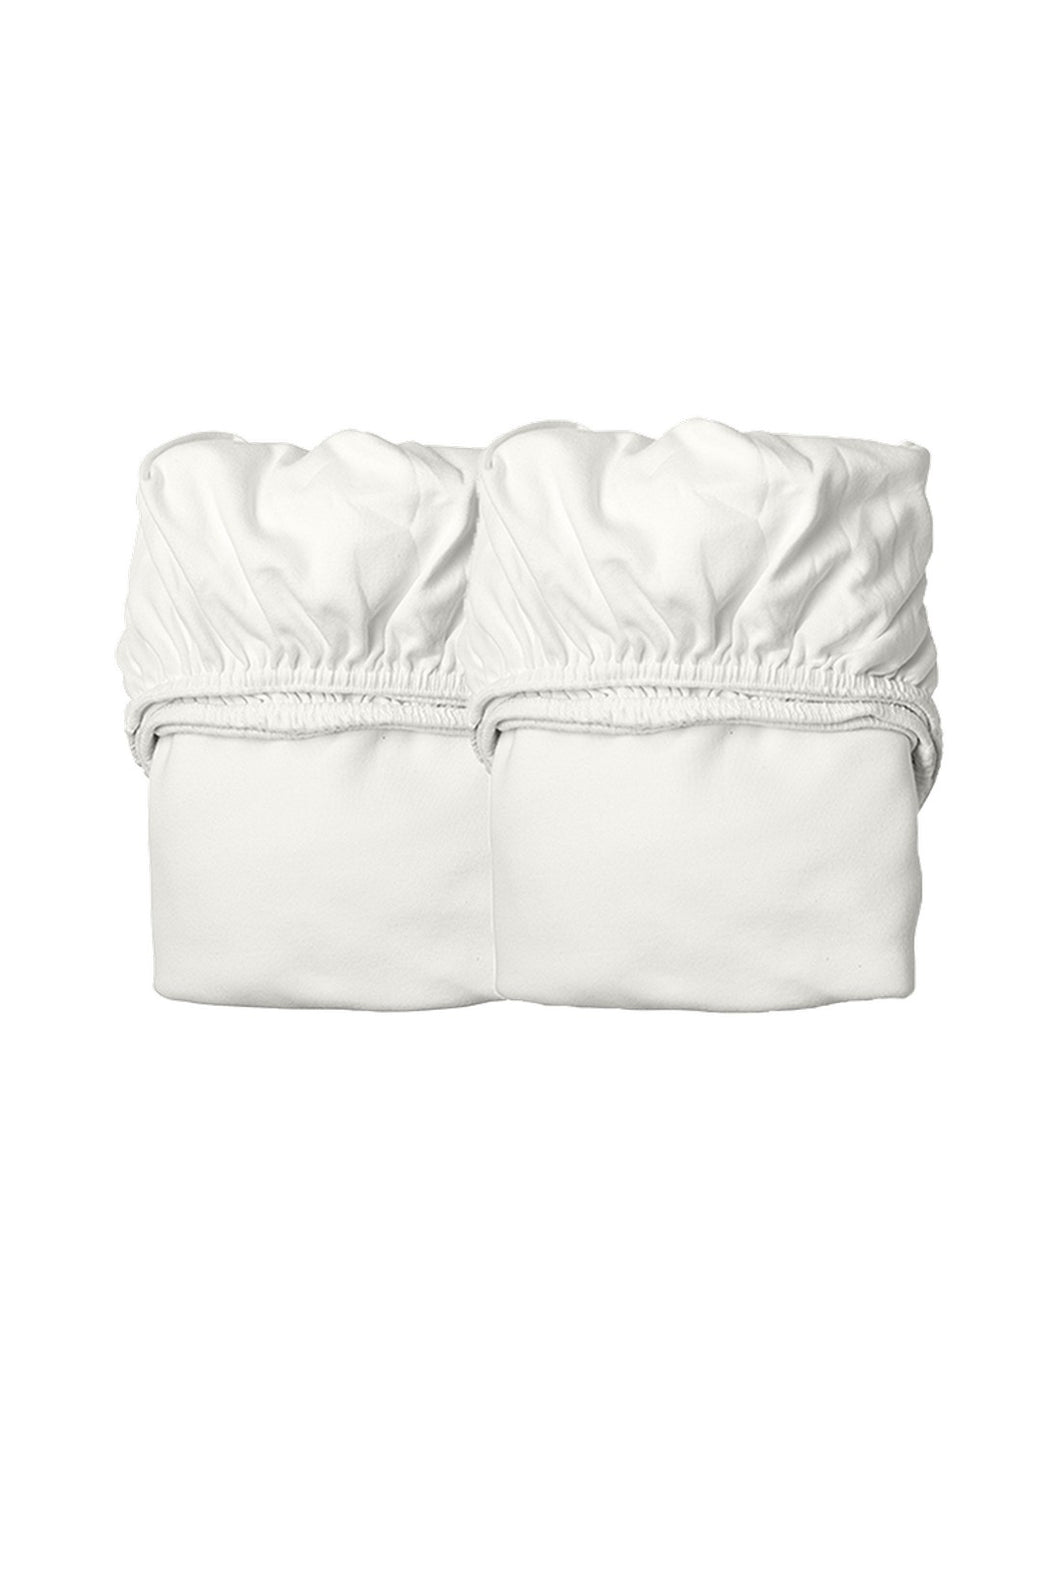 Leander Fitted Sheet For Baby Cot - Snow White 1